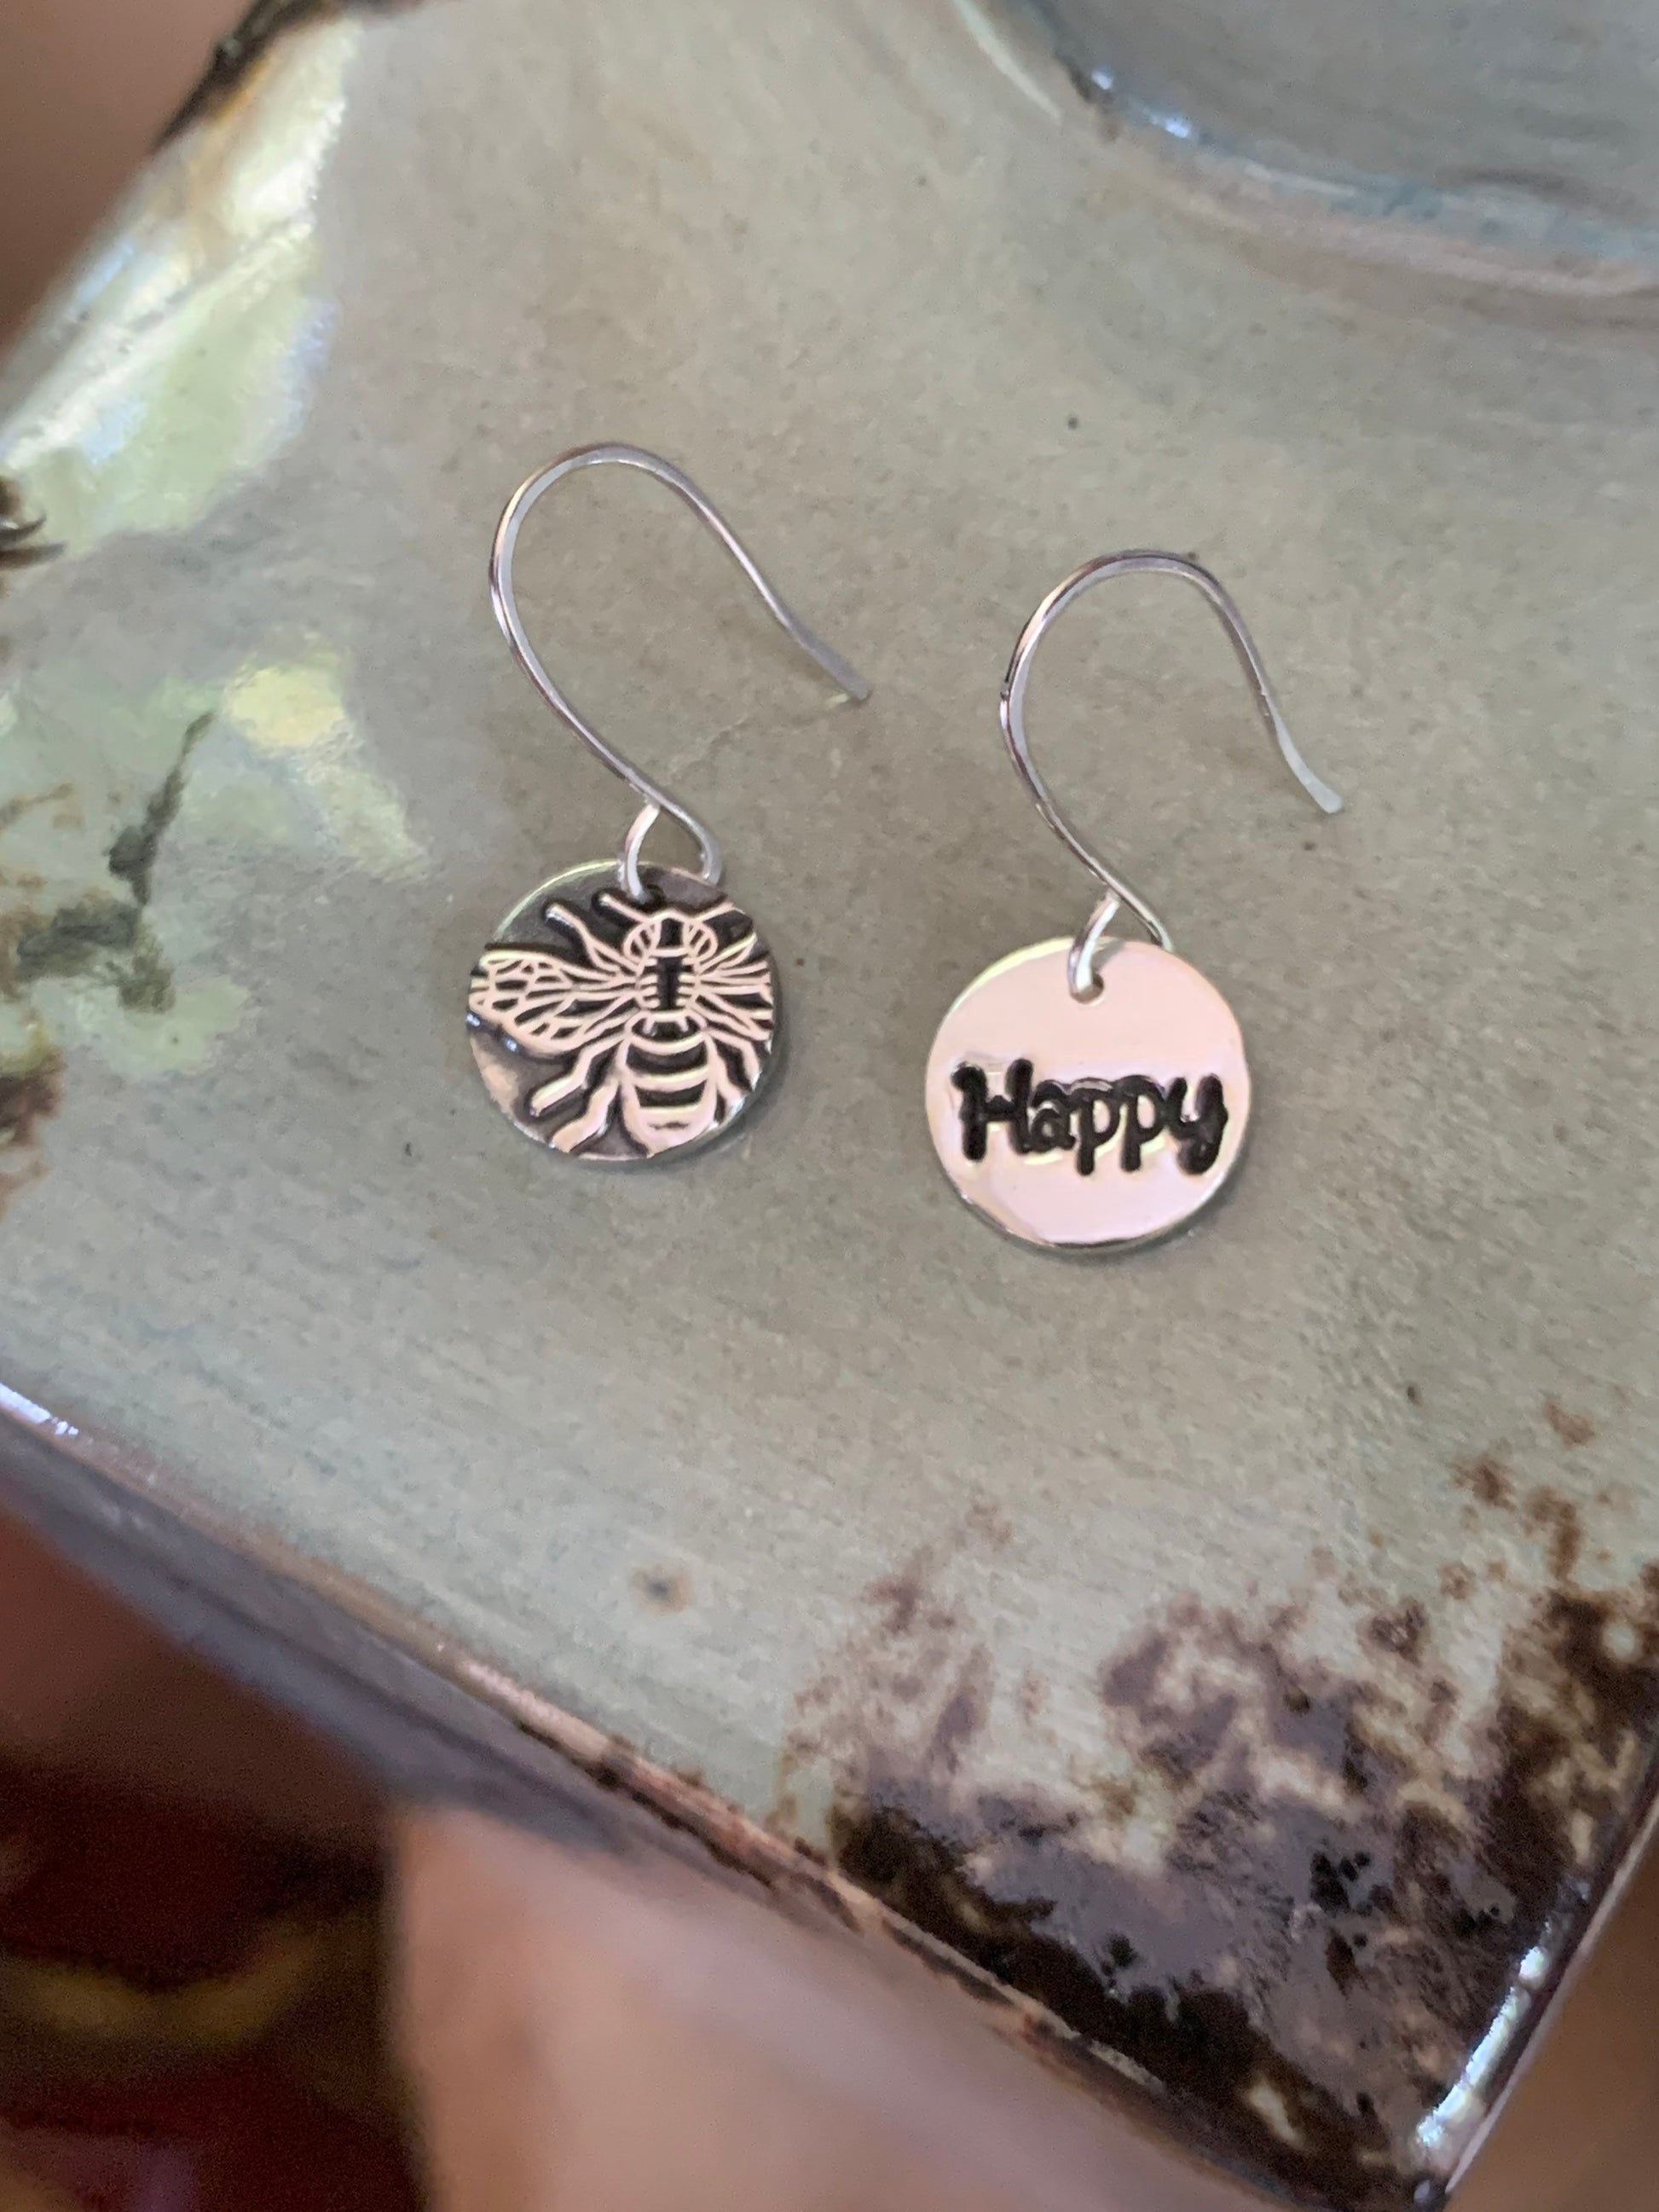 Be Happy Earrings, Sterling Silver Round Bumblebee Charm, Bee Earrings, Fun Charm Earrings, Thinking of You Gift, Mismatched Earrings, Bees